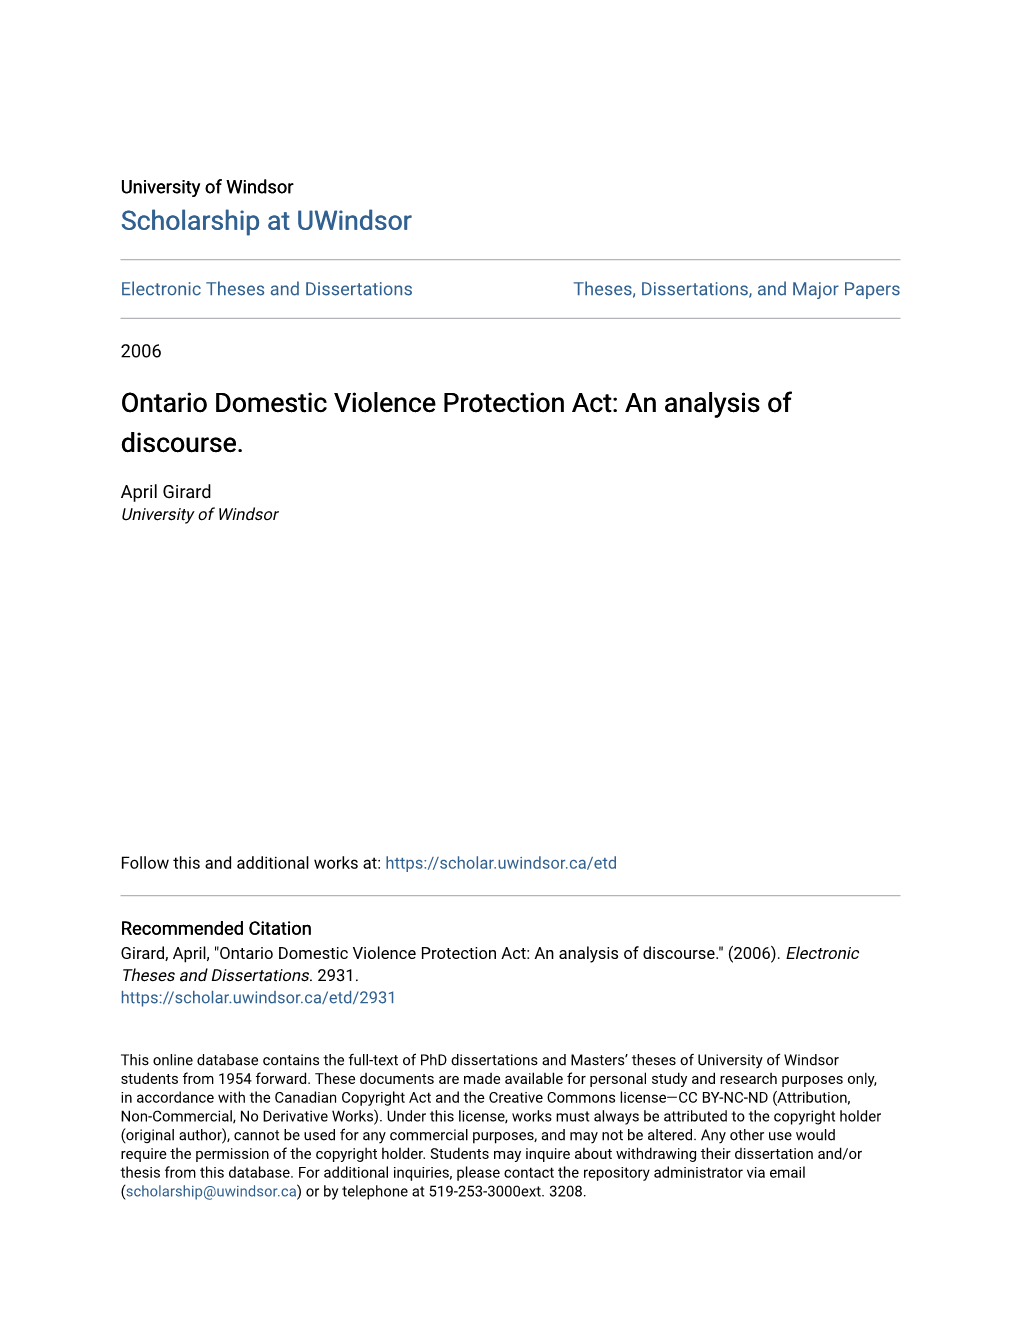 Ontario Domestic Violence Protection Act: an Analysis of Discourse